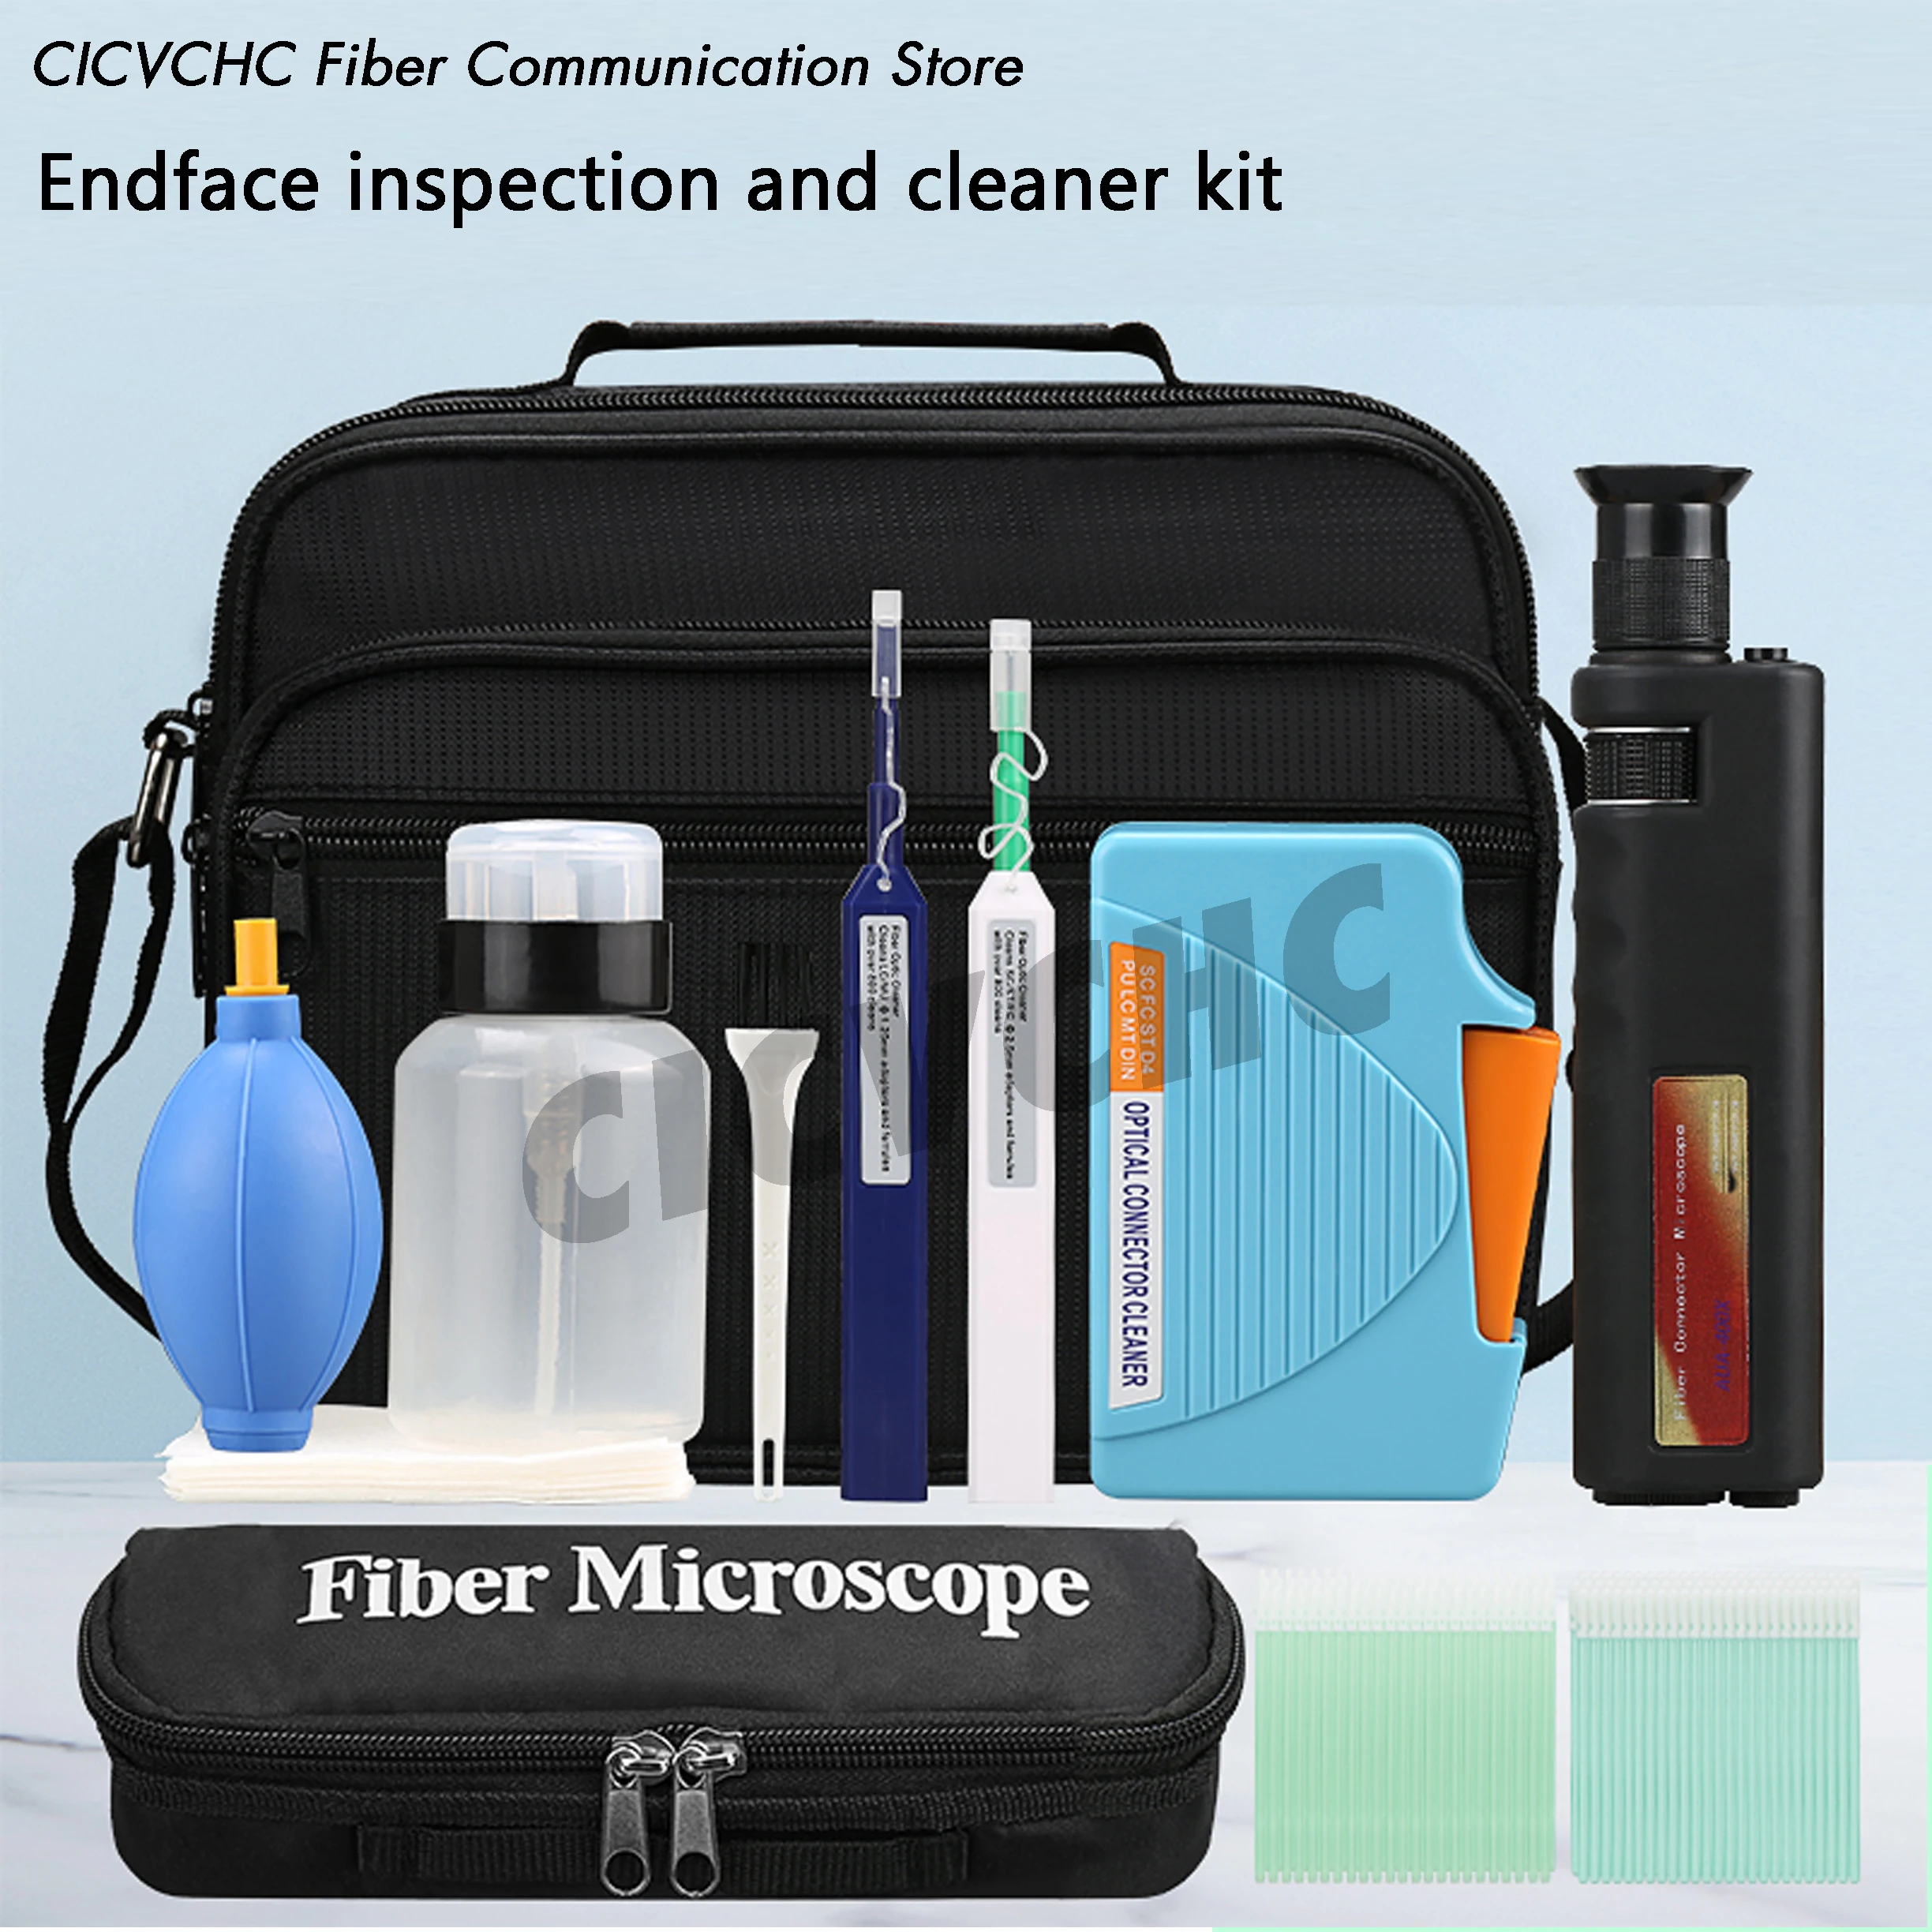 Fiber end-face inspection and cleaner tool kit with 400x fiber microscope (Hand held) 1000x digital microscope hd usb wifi mobile phone microscope led electronic microscope camera for smartphone pcb inspection tool